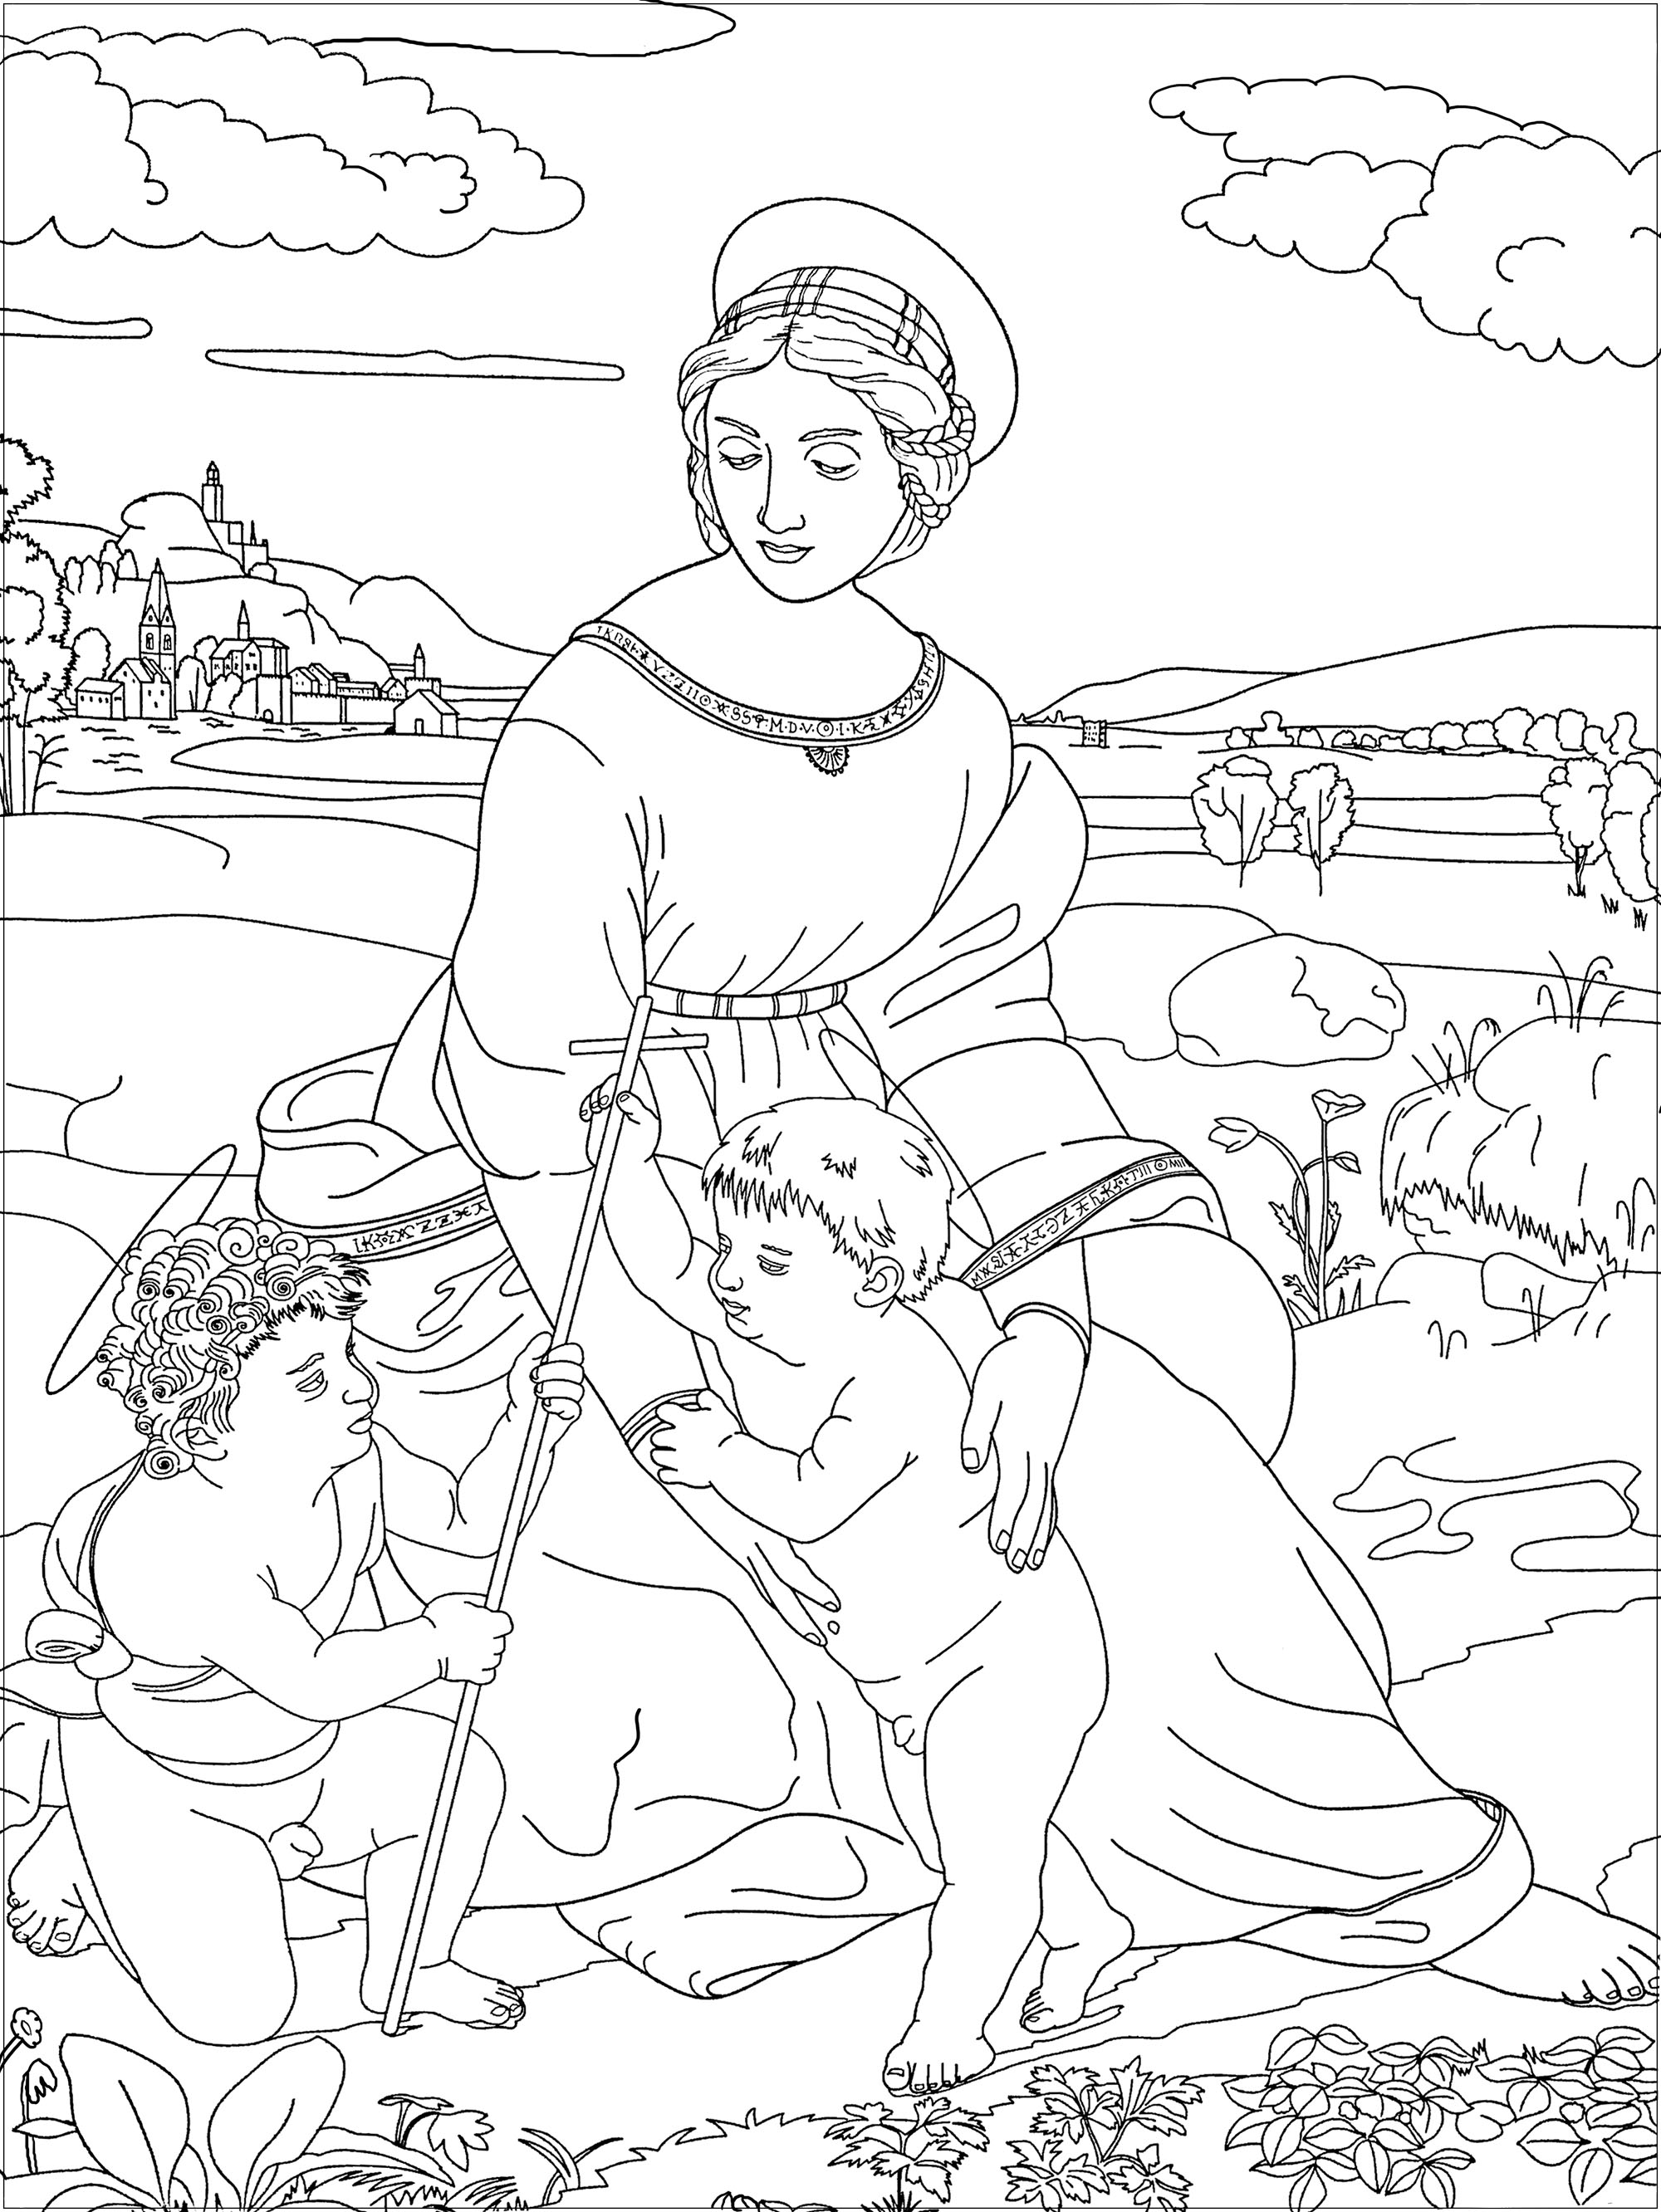 Coloring page inspired by a work by Raphaël : Madonna of the Meadow